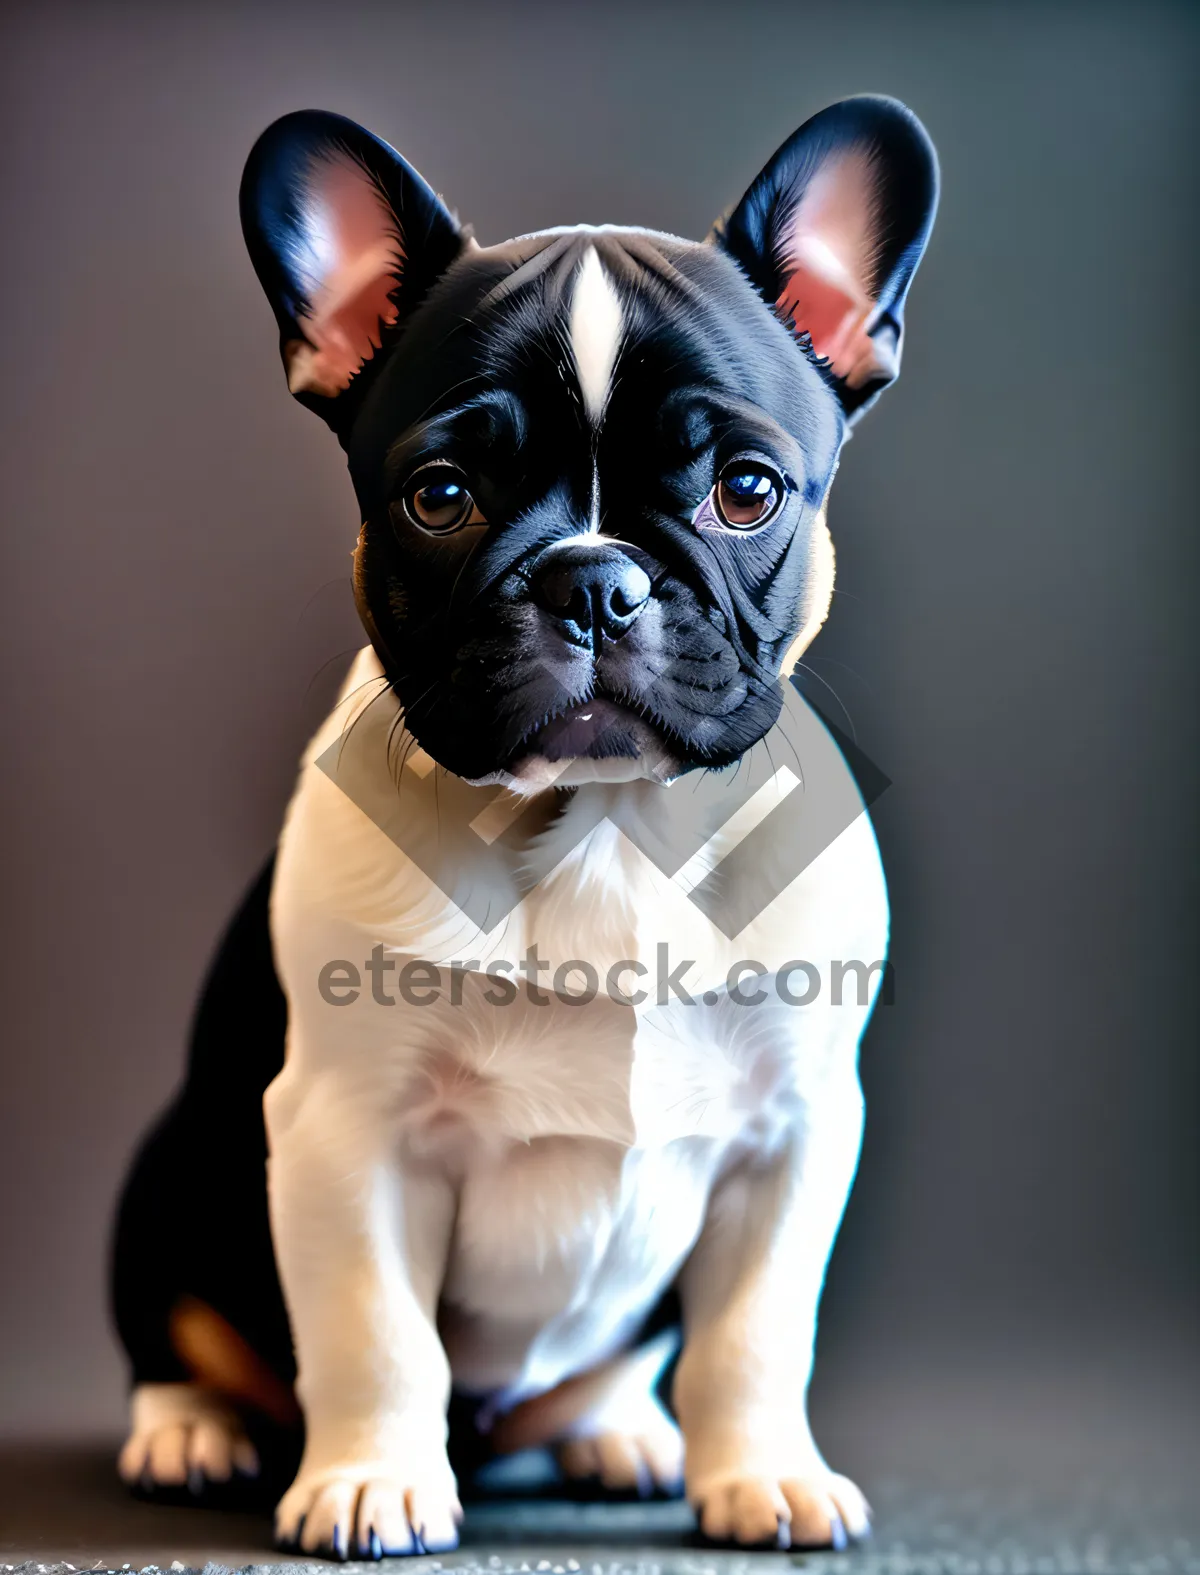 Picture of Bulldog Boxer - Cute Wrinkly Canine Portrait